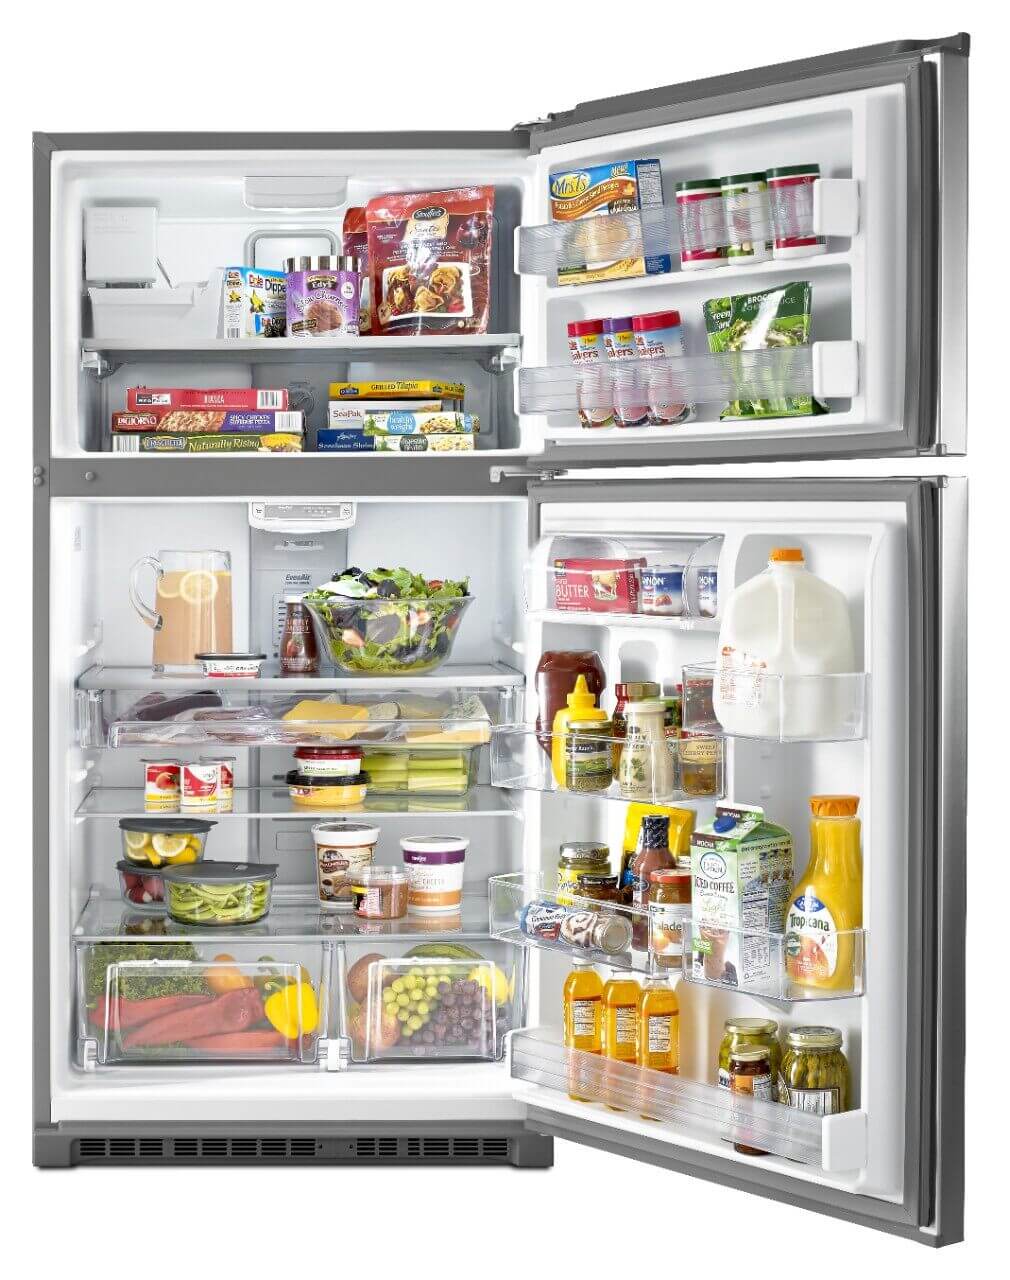 Maytag - 32.75 Inch 21.24 cu. ft Top Mount Refrigerator in Stainless - MRT711SMFZ